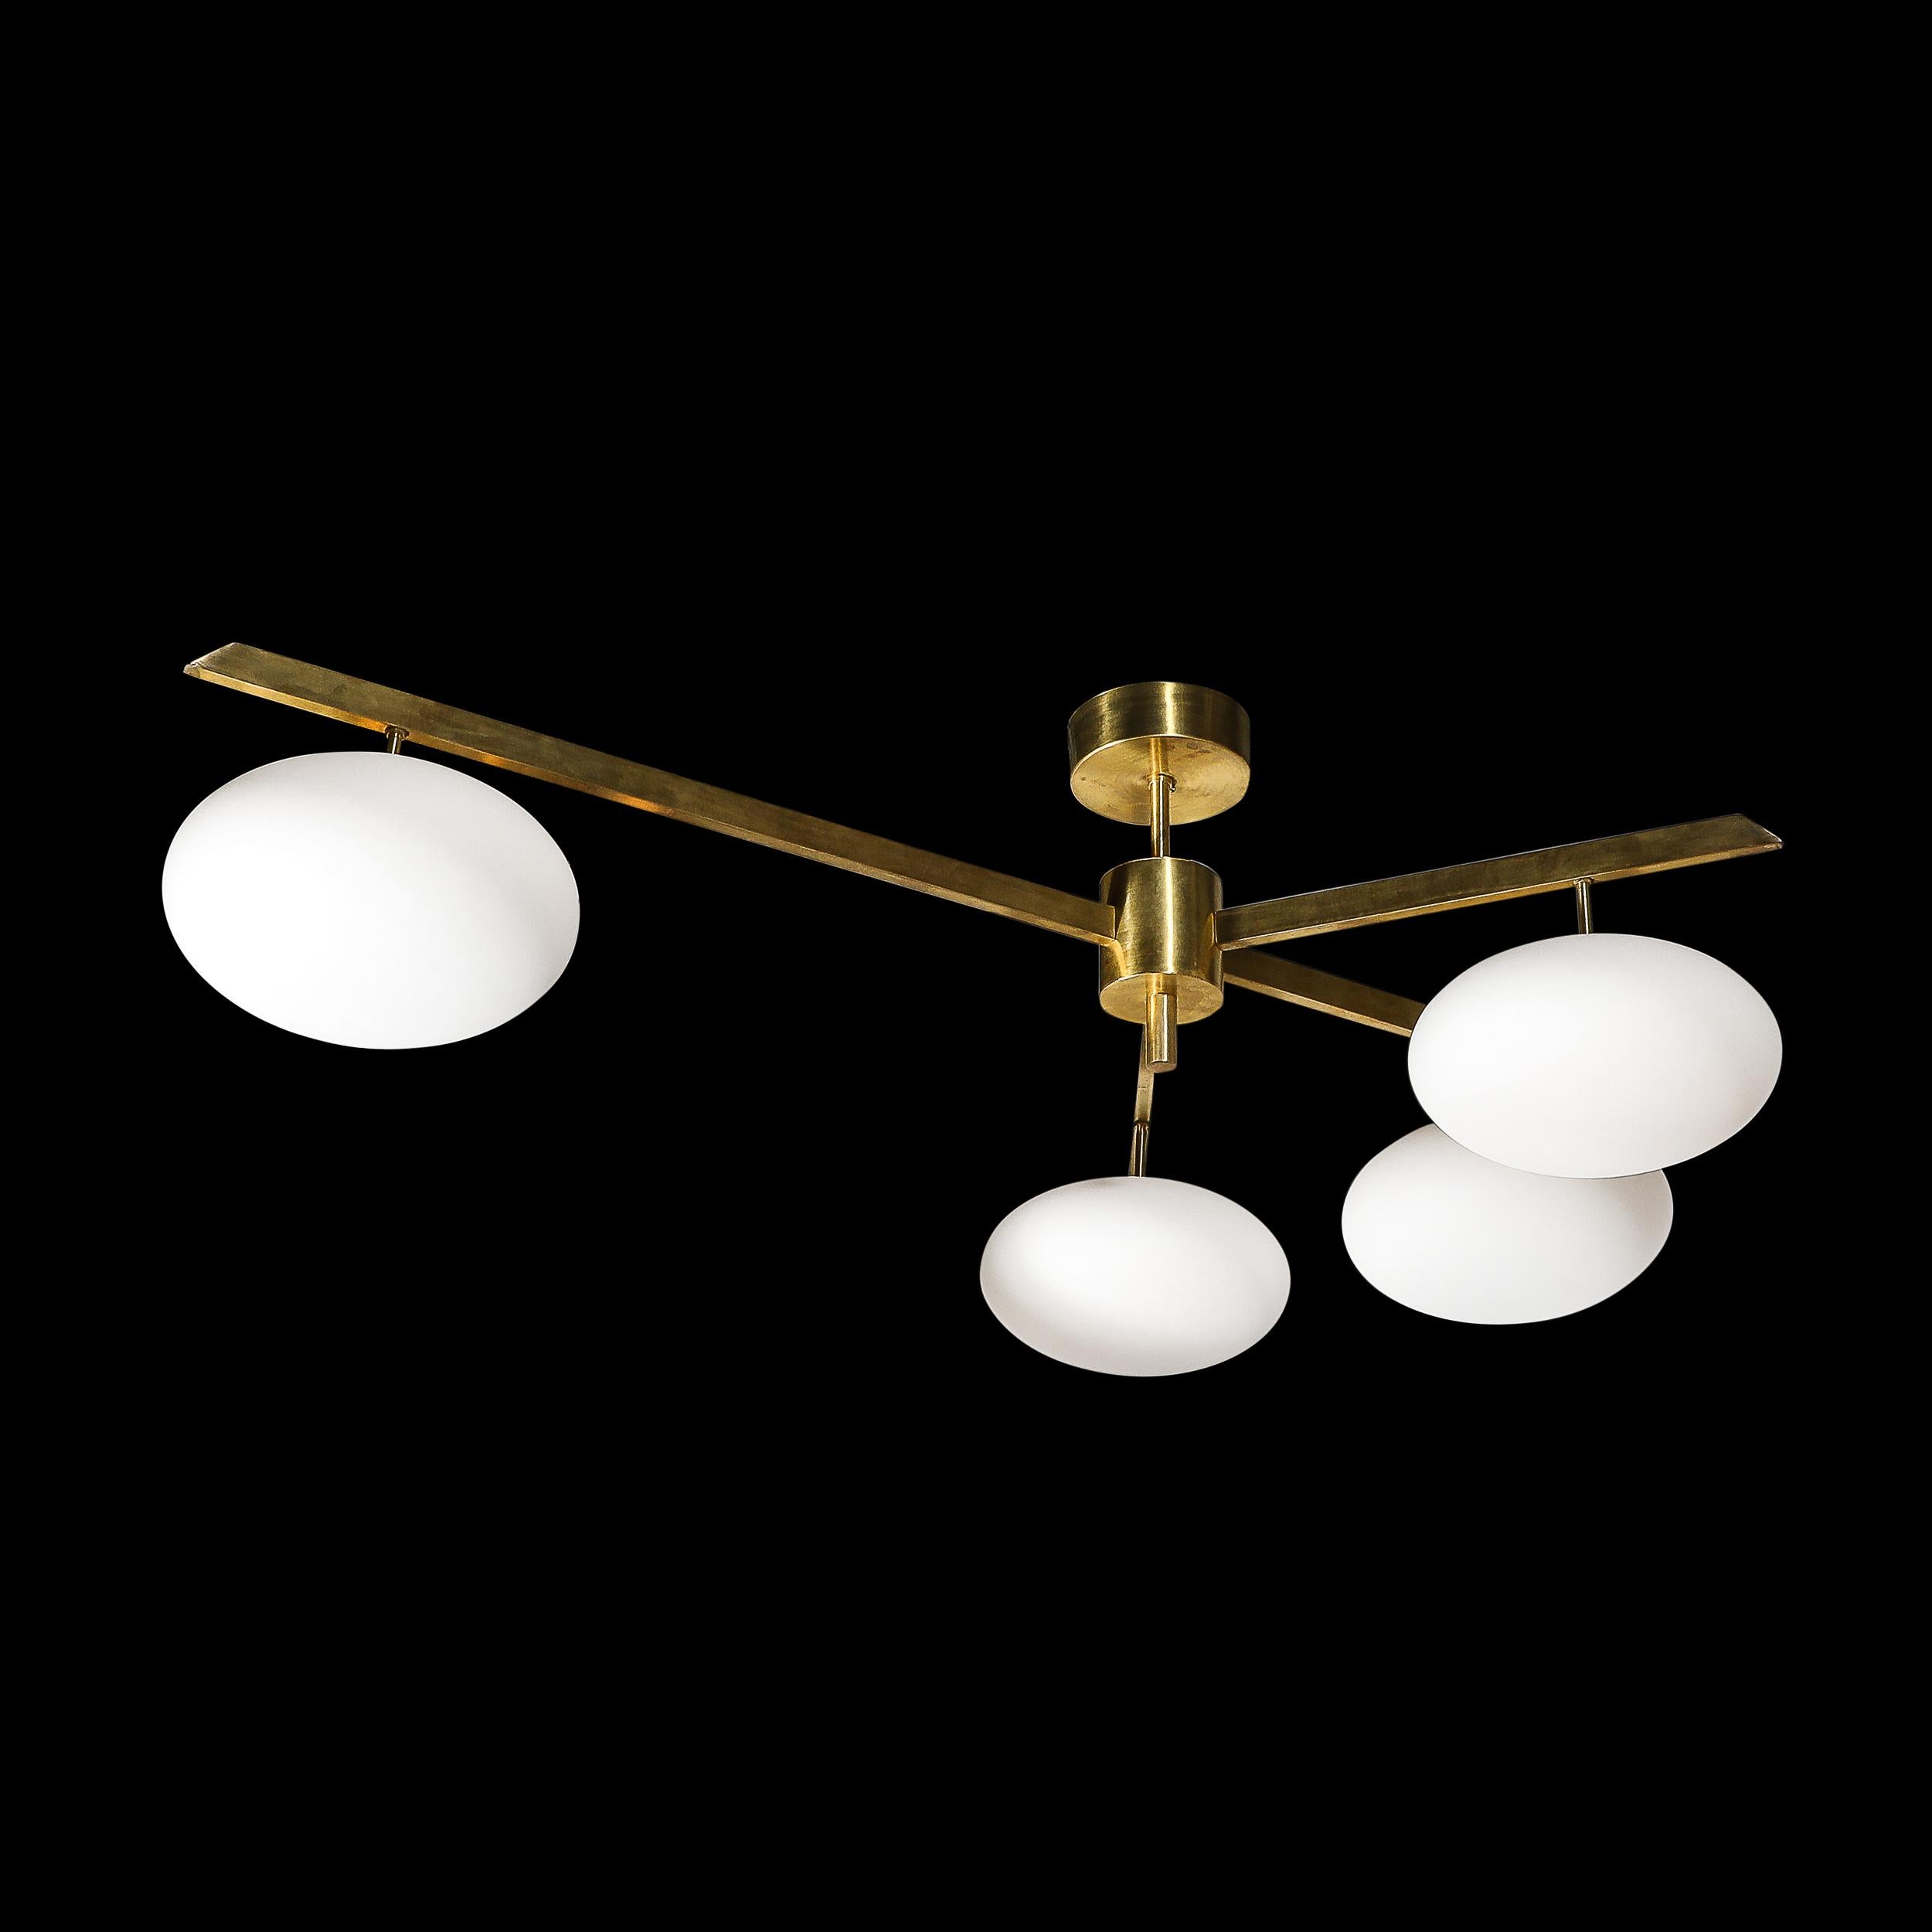 Italian Modernist Asymmetrical Brushed Brass & Frosted Glass Four-Arm Globe Chandelier For Sale